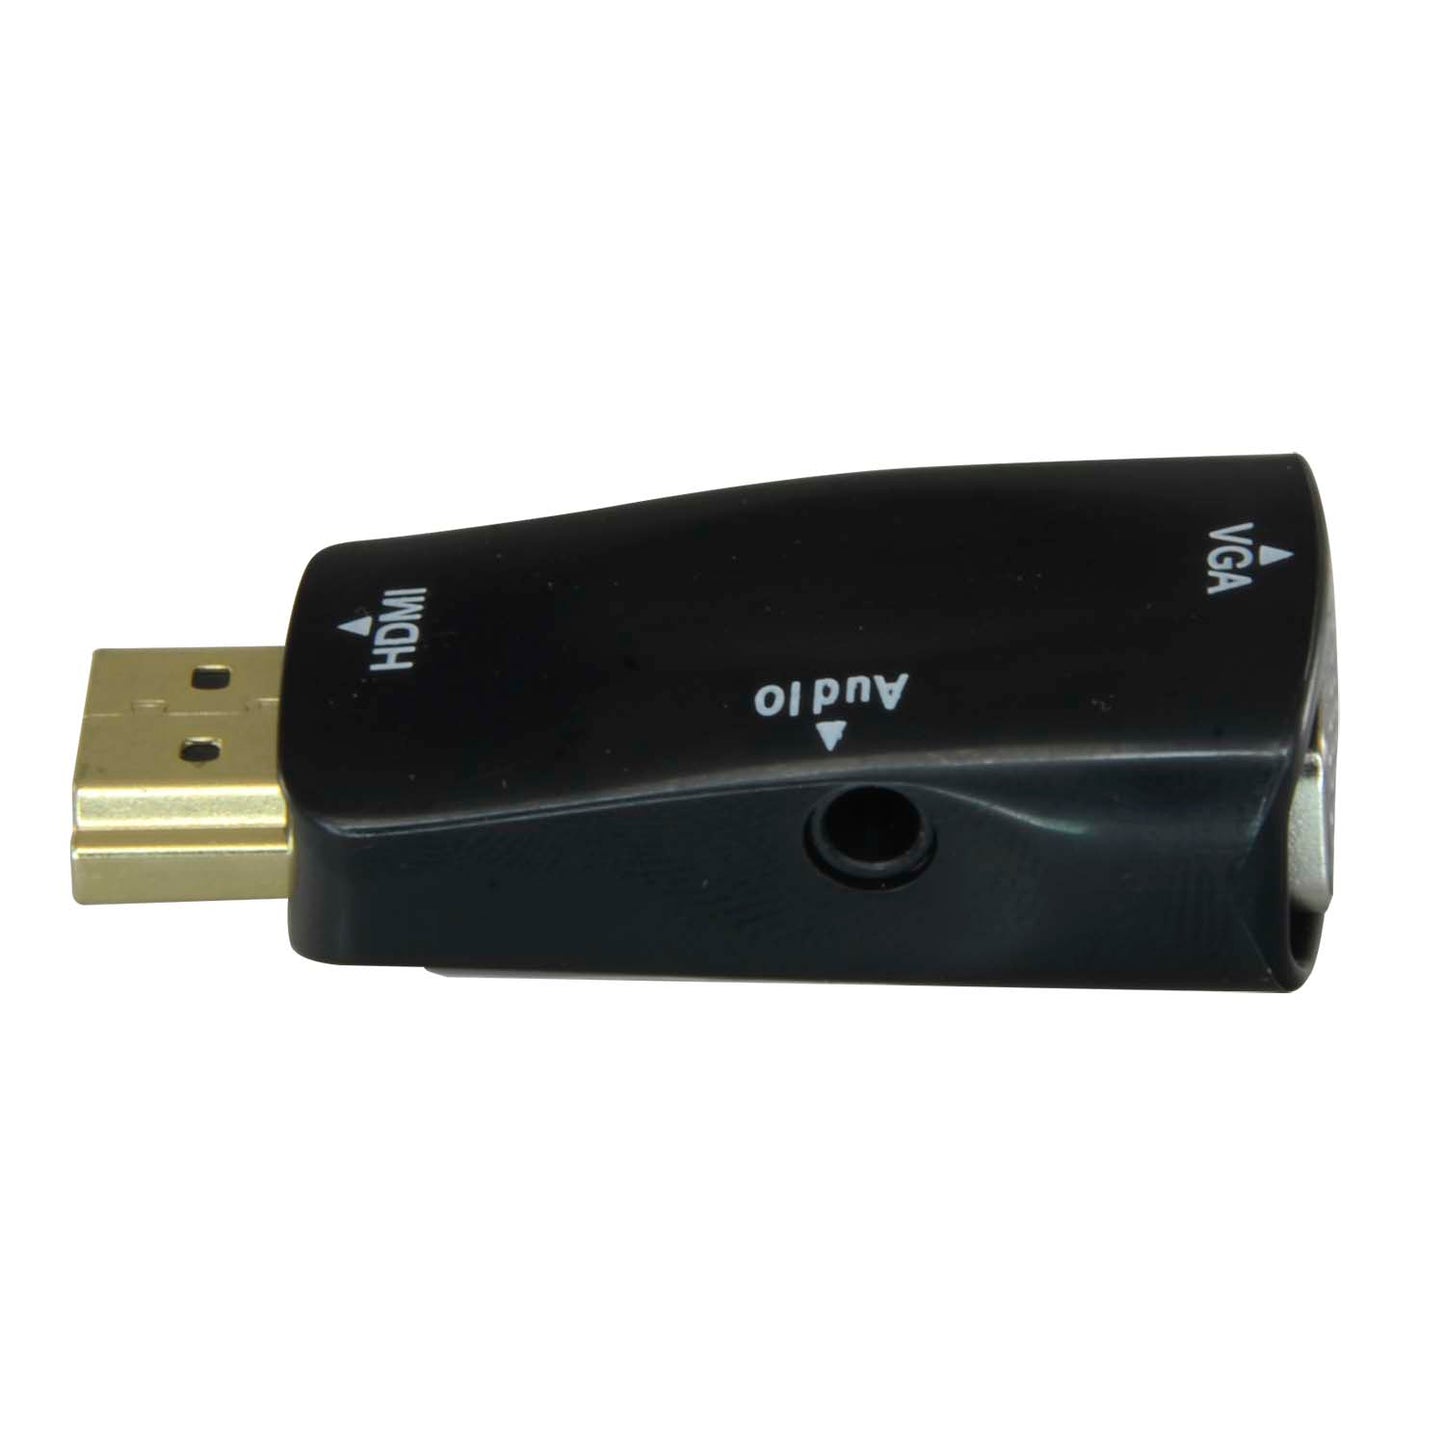 HDMI to VGA+Audio Adapter - Passive, no power required - Converts one HDMI output to VGA+Audio - 1080p/720p Resolution - HDMI Input - VGA+Audio Output